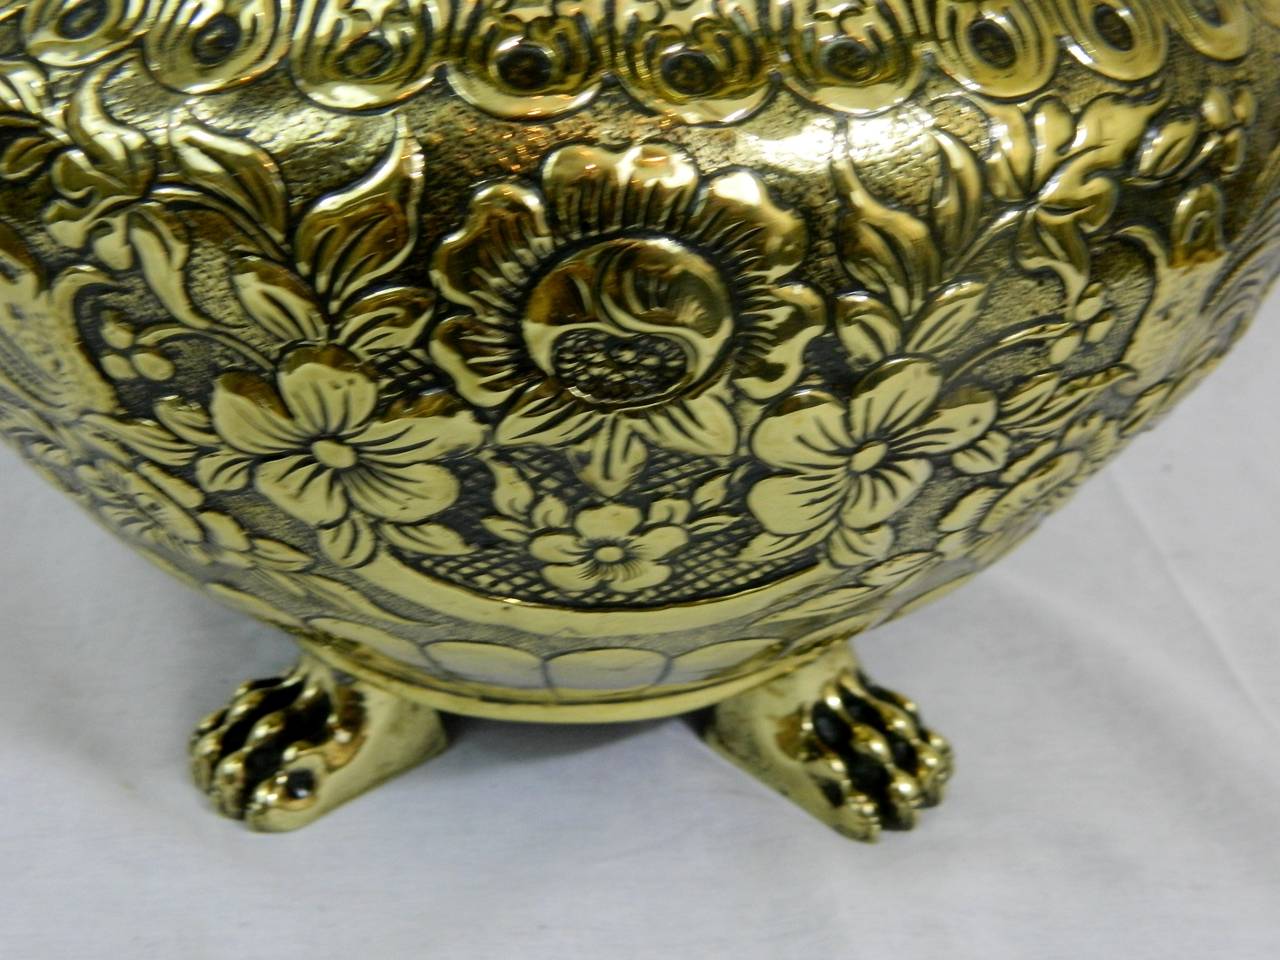 19th Century Polished Brass Large Jardiniere or Planter with Original Liner In Good Condition For Sale In Savannah, GA